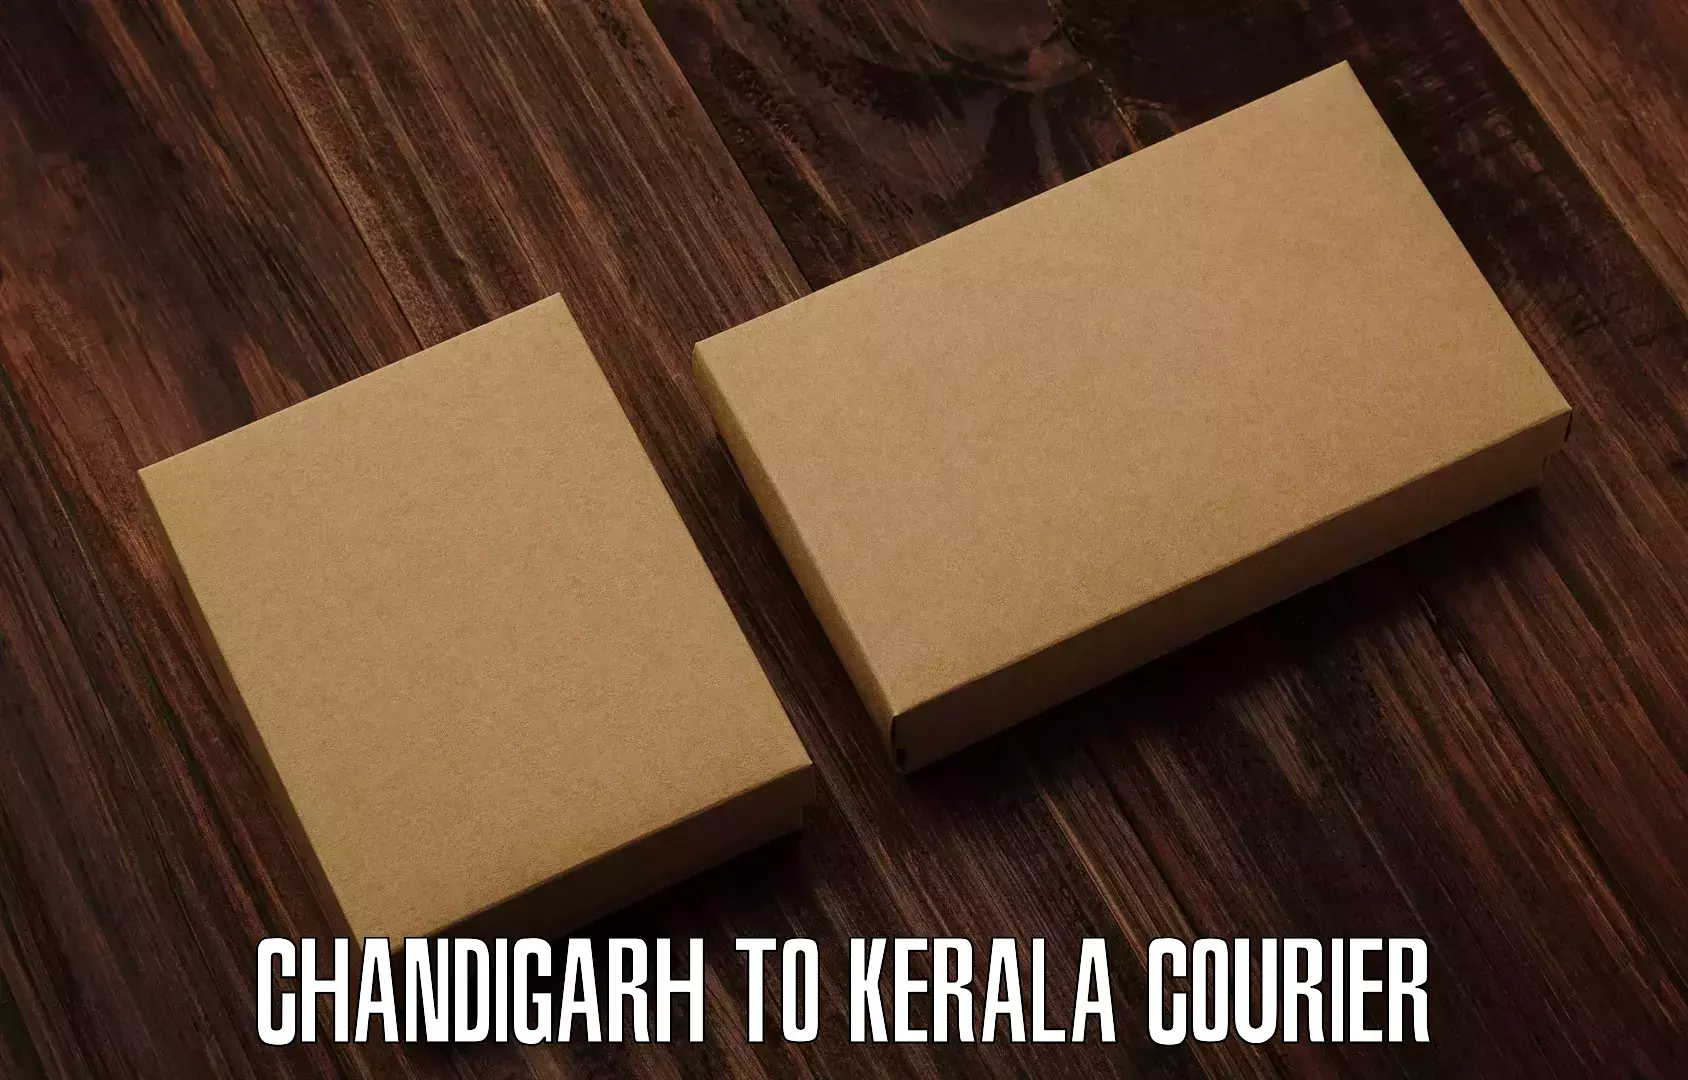 Global courier networks Chandigarh to Cochin Port Kochi